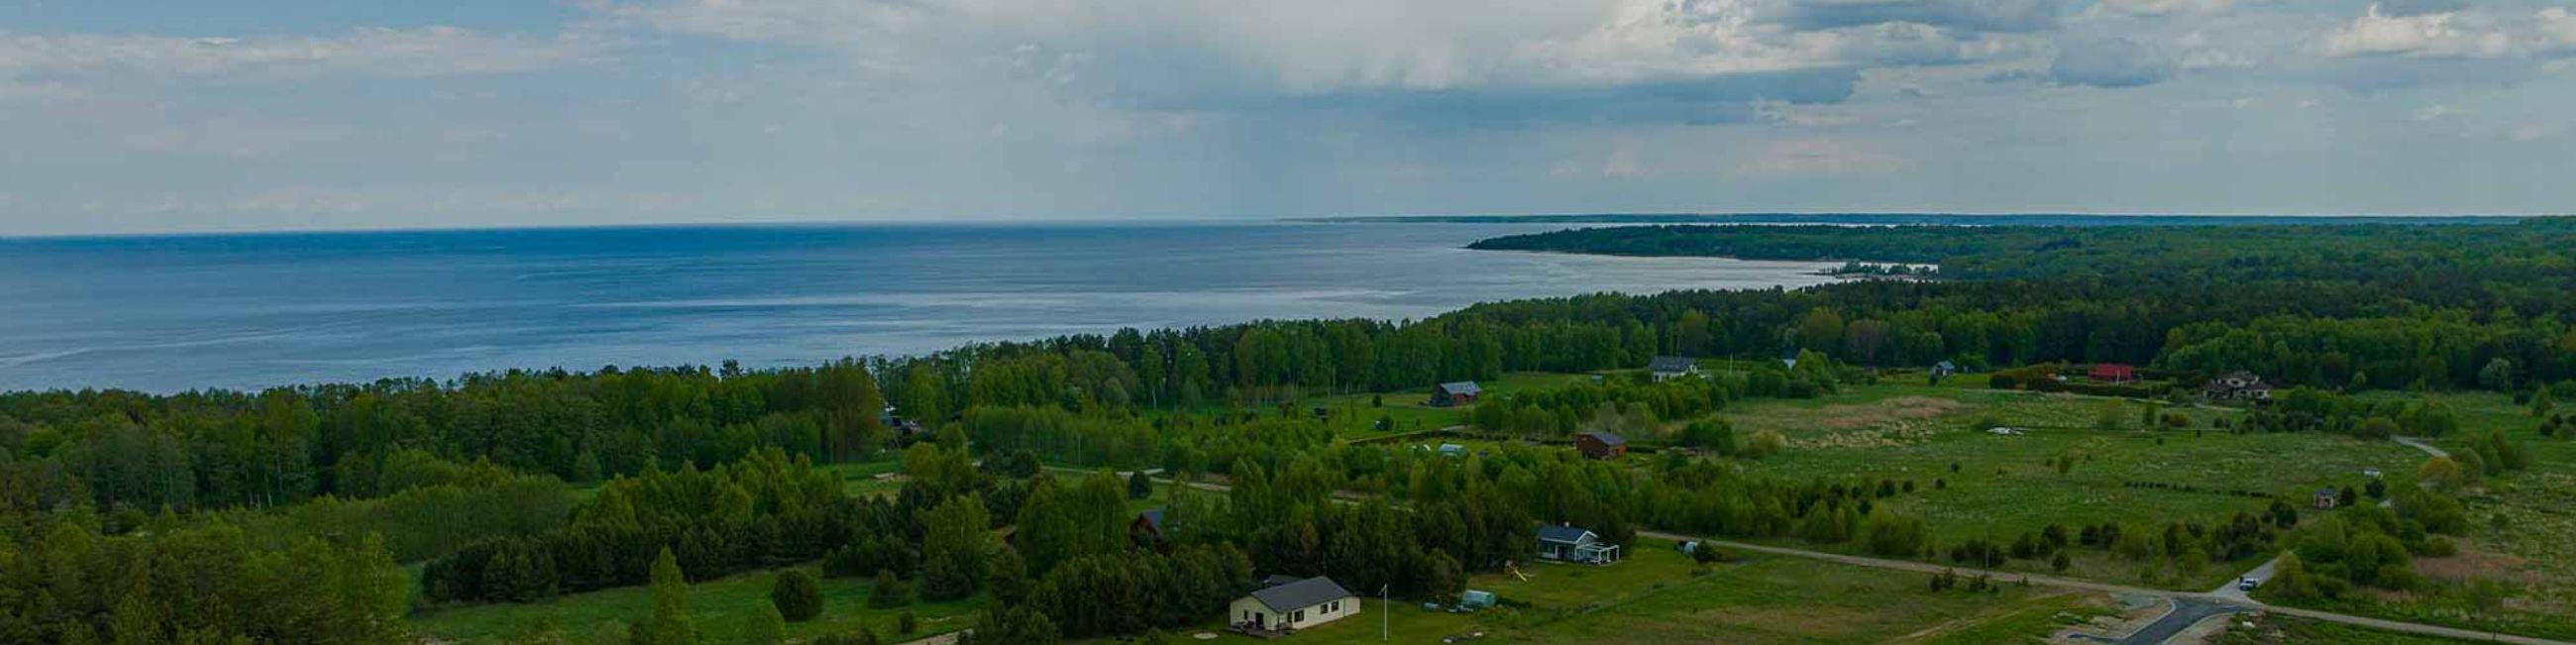 planning, preparation of plots, foundation work, sale of plots, sale of houses, finishing works, Tallinn, Waterway, harjumaa, sale of plots and finished houses